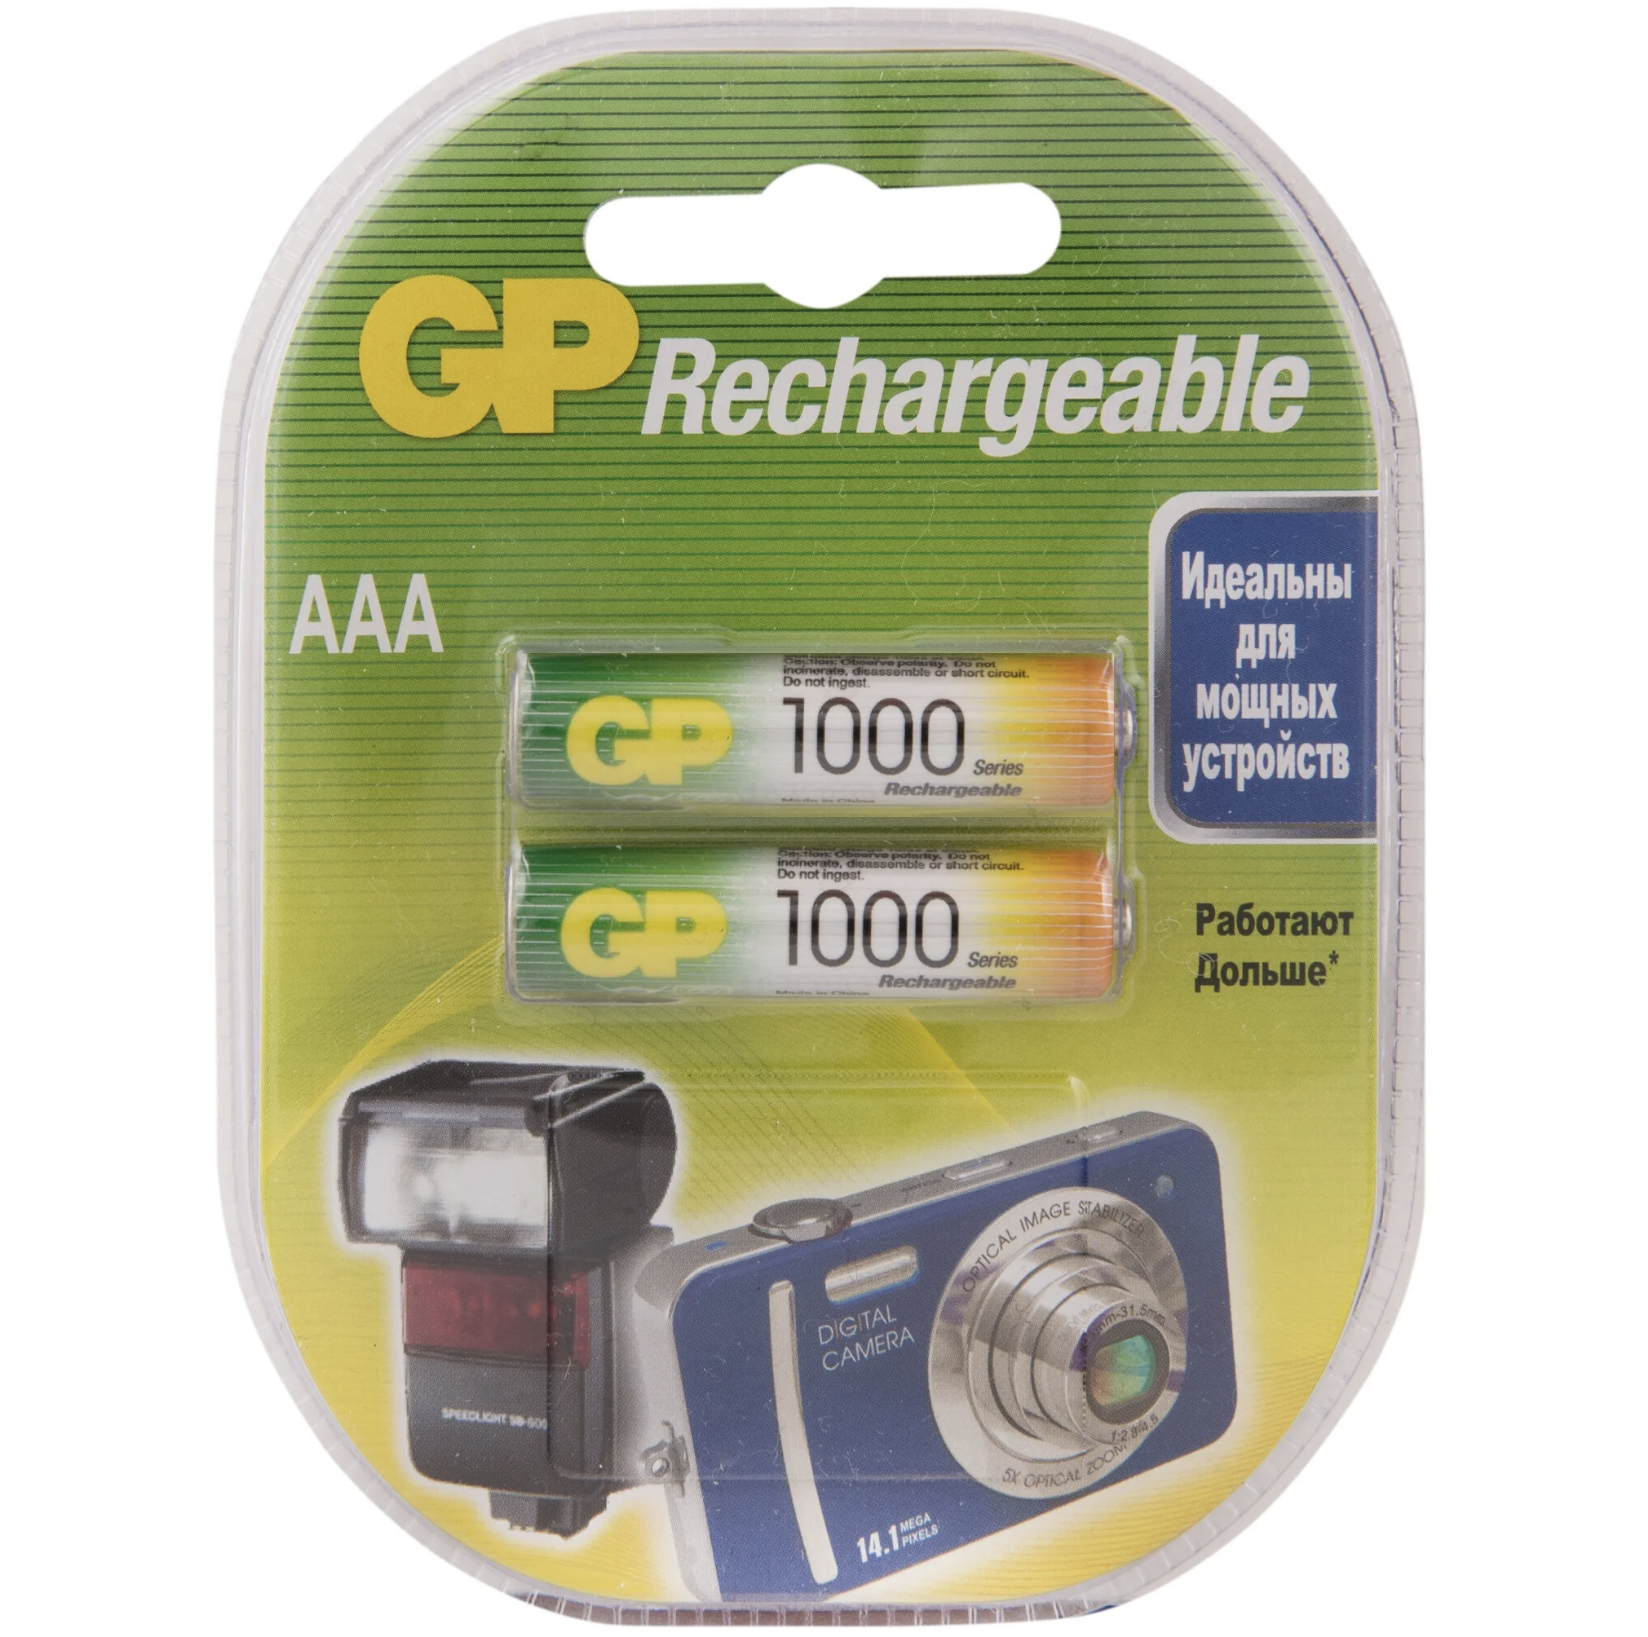  GP -  Rechargeable 1000 Series AAA 1000 / 2 